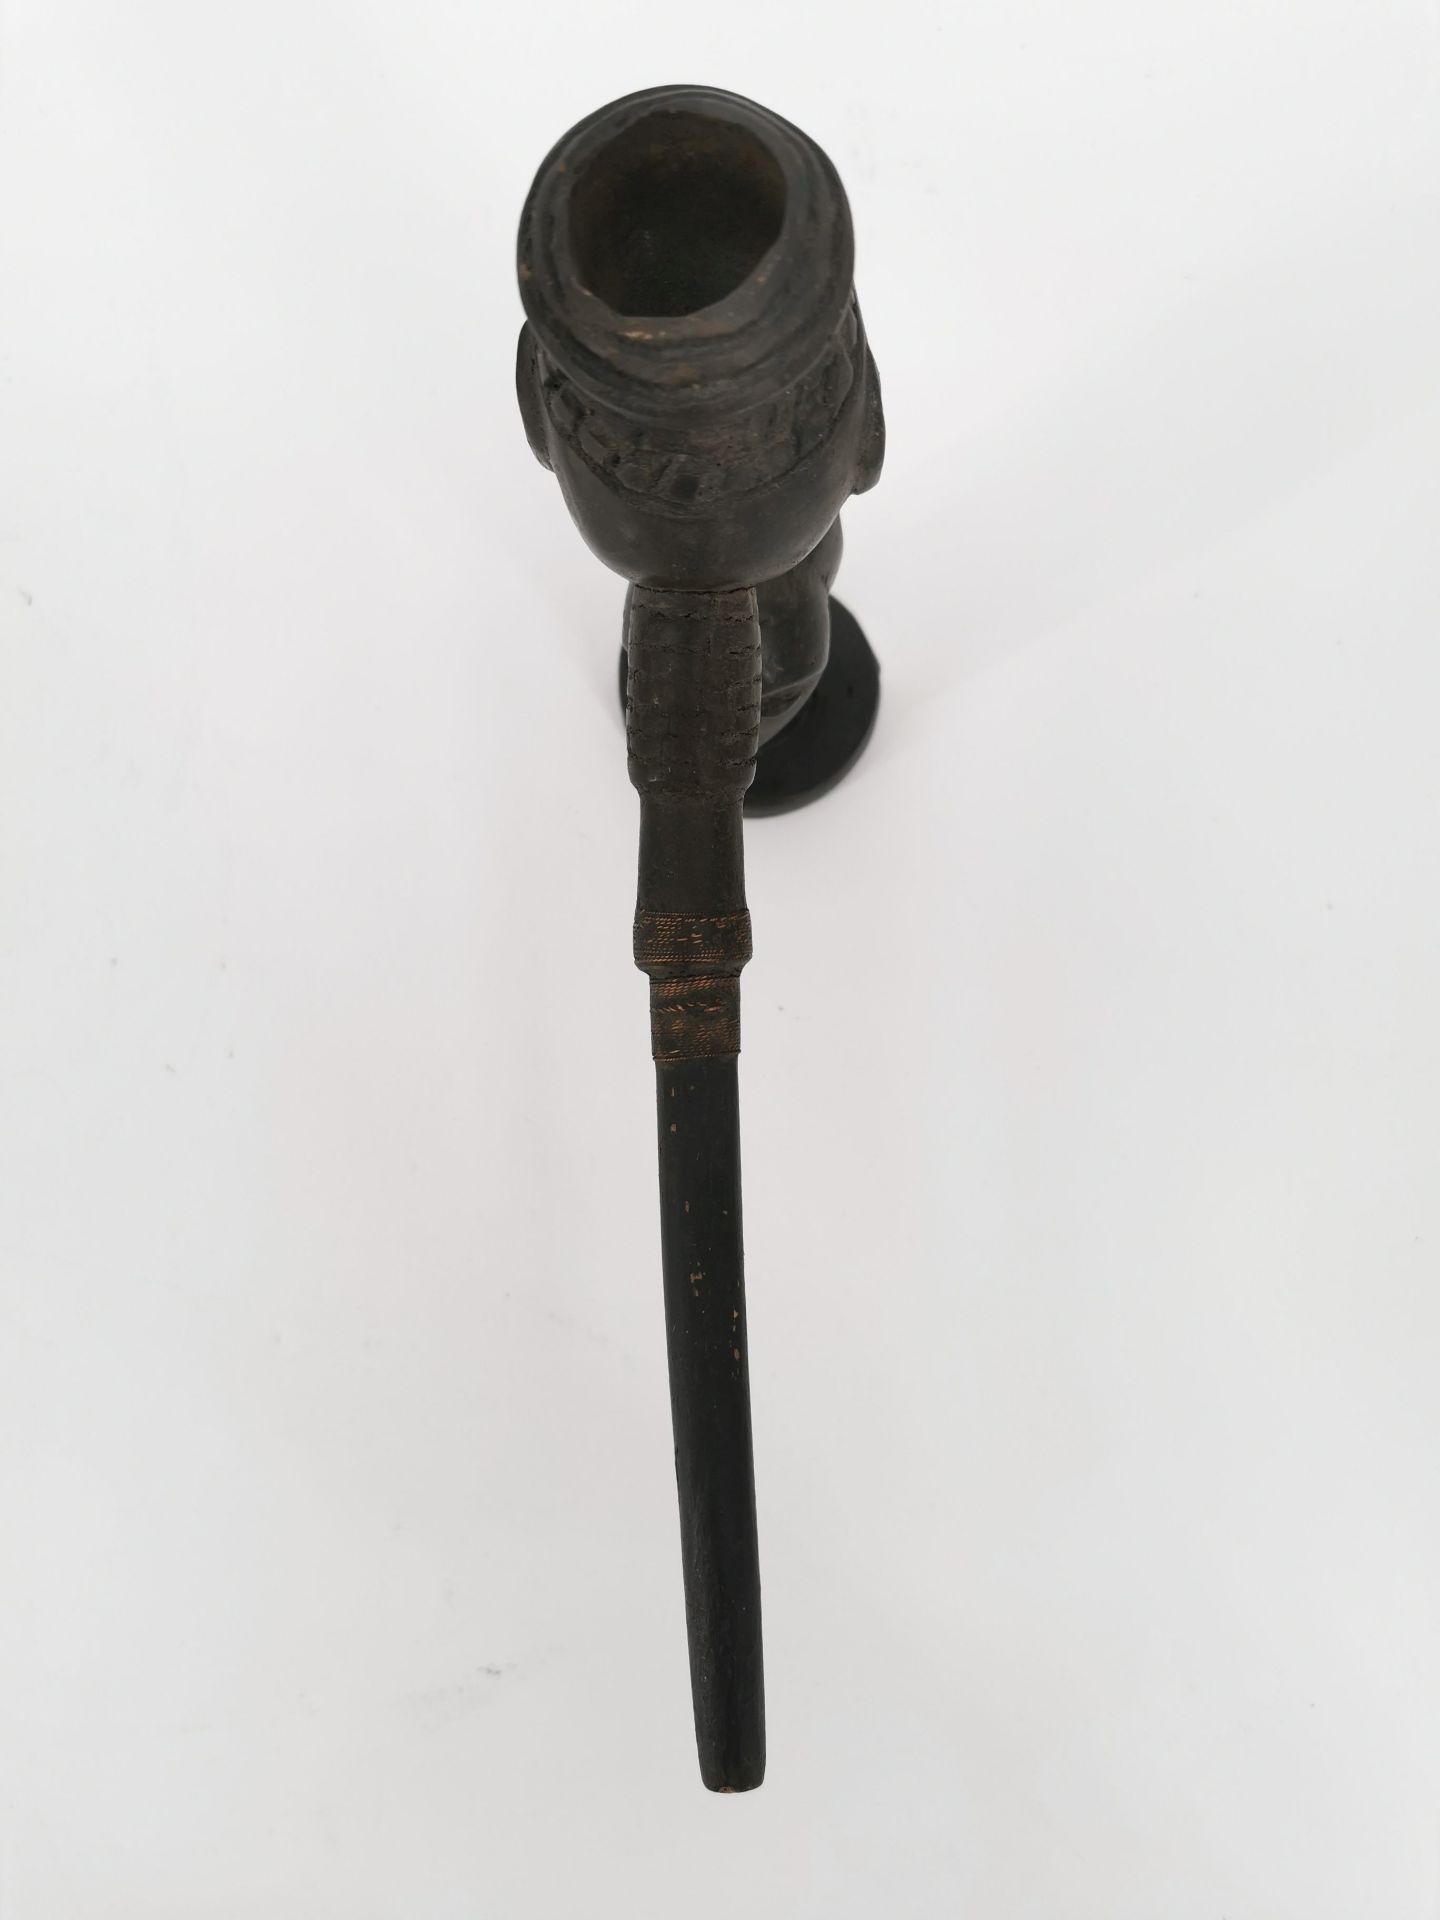 KUBA PIPE FROM ZAIRE - Image 9 of 11